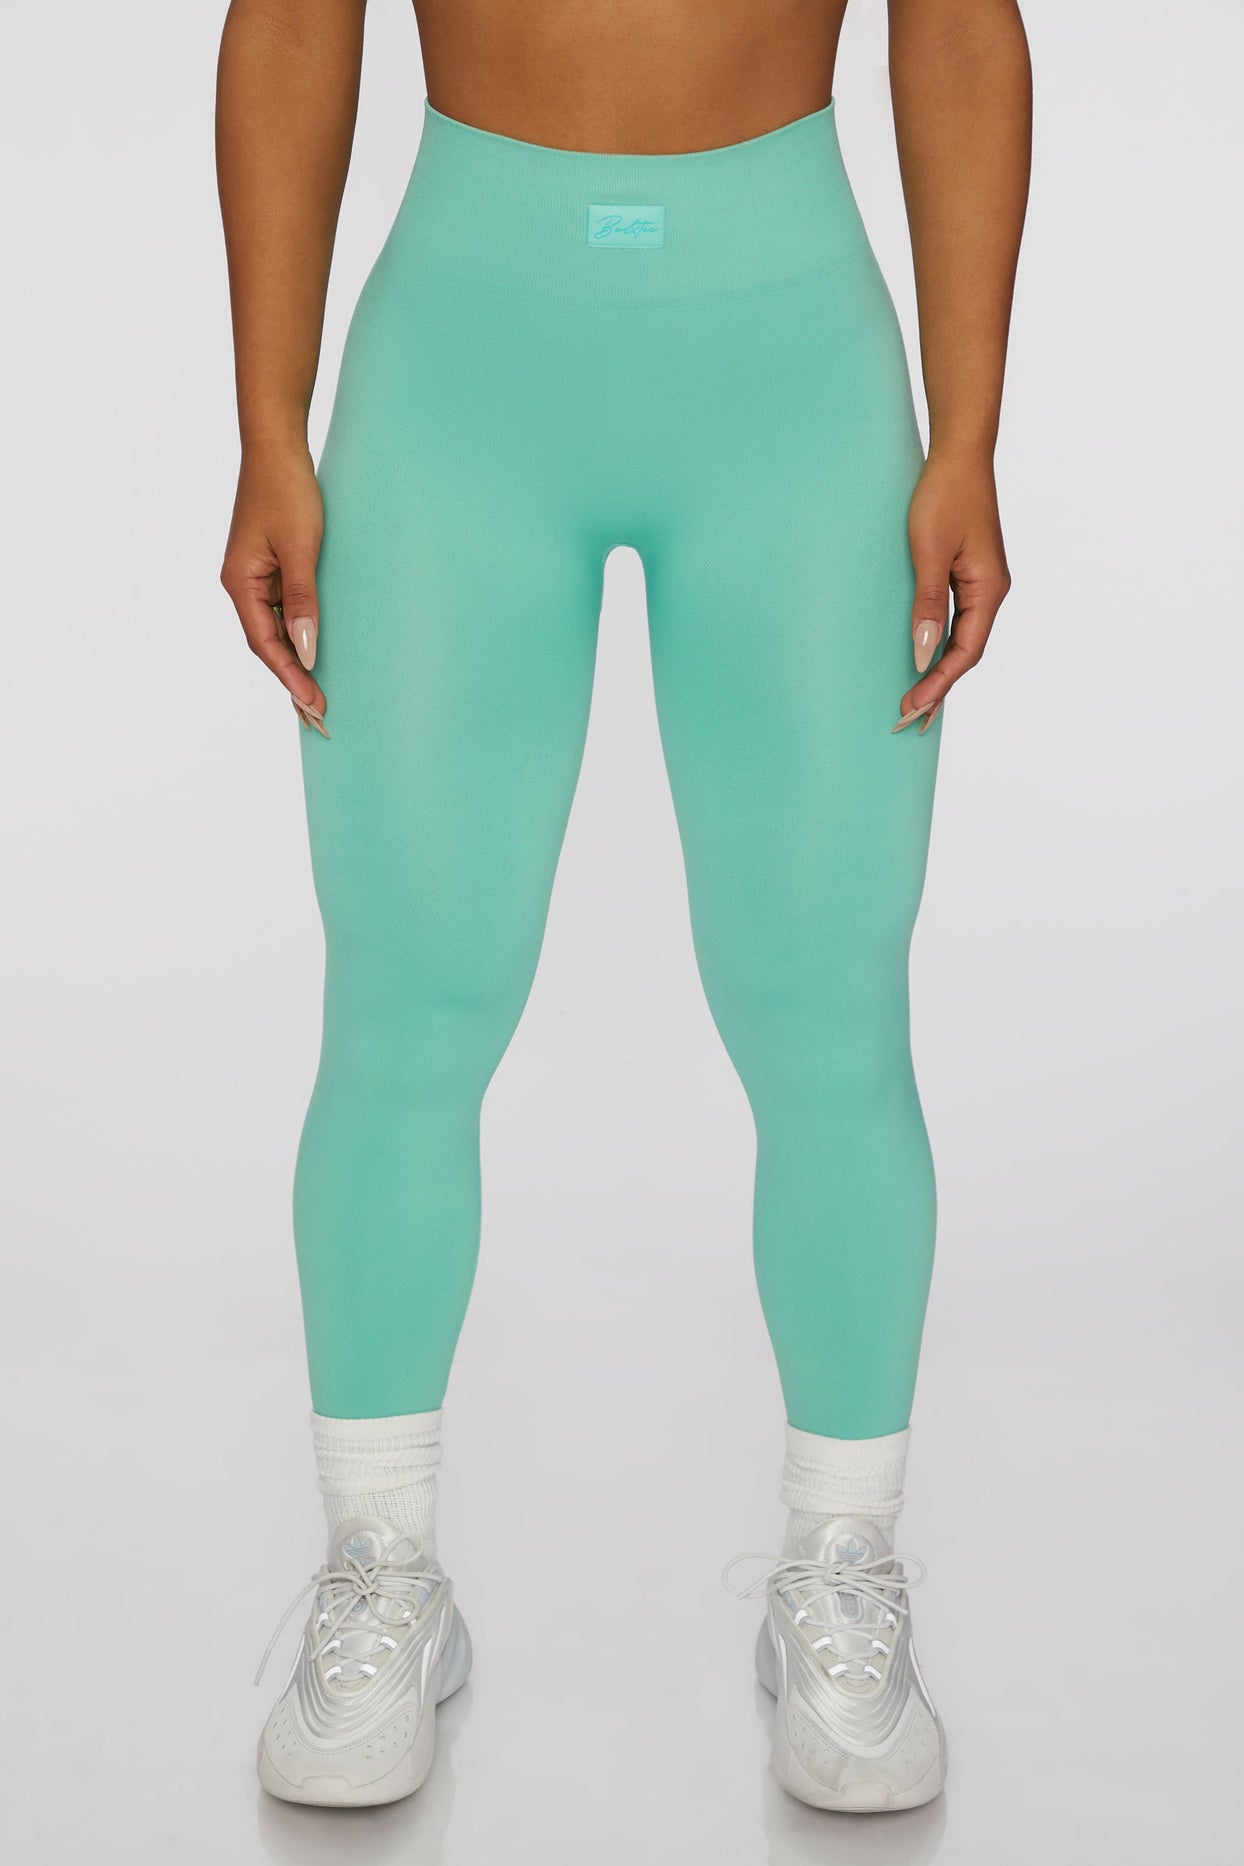 Energetic Petite Seamless High Waisted Leggings in Turquoise